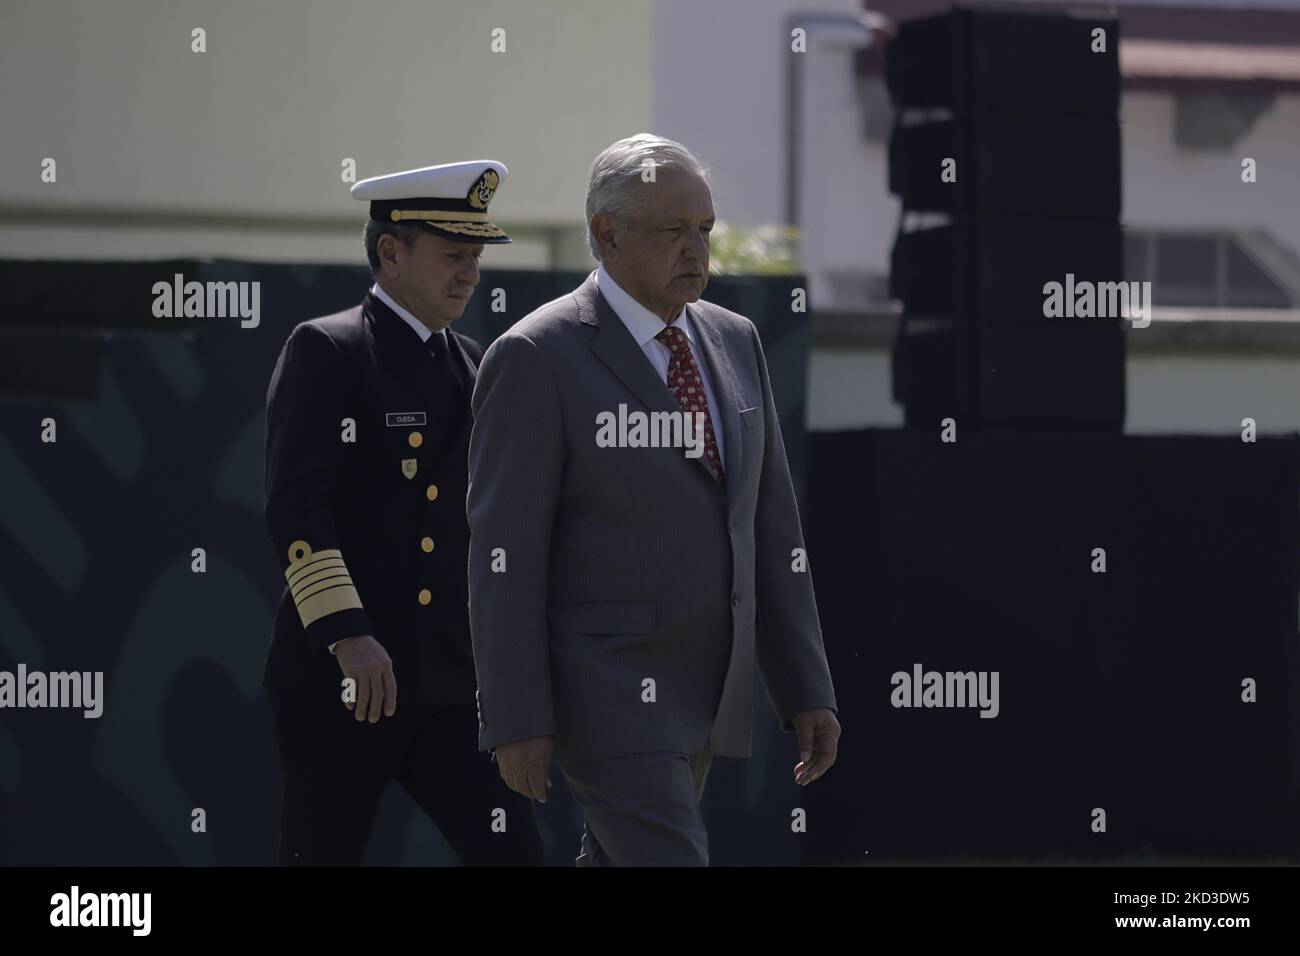 At the centre, Andrés Manuel López Obrador, President of Mexico, accompanied by José Rafael Ojeda Durán, Secretary of the Navy; on the occasion of Flag Day inside the Campo Marte facilities, Mexico City. Mexican Flag Day was established on 24 February 1934. However, this national commemoration was officially recognised until 1940, by decree of President Lázaro Cárdenas del Río. (Photo by Gerardo Vieyra/NurPhoto) Stock Photo